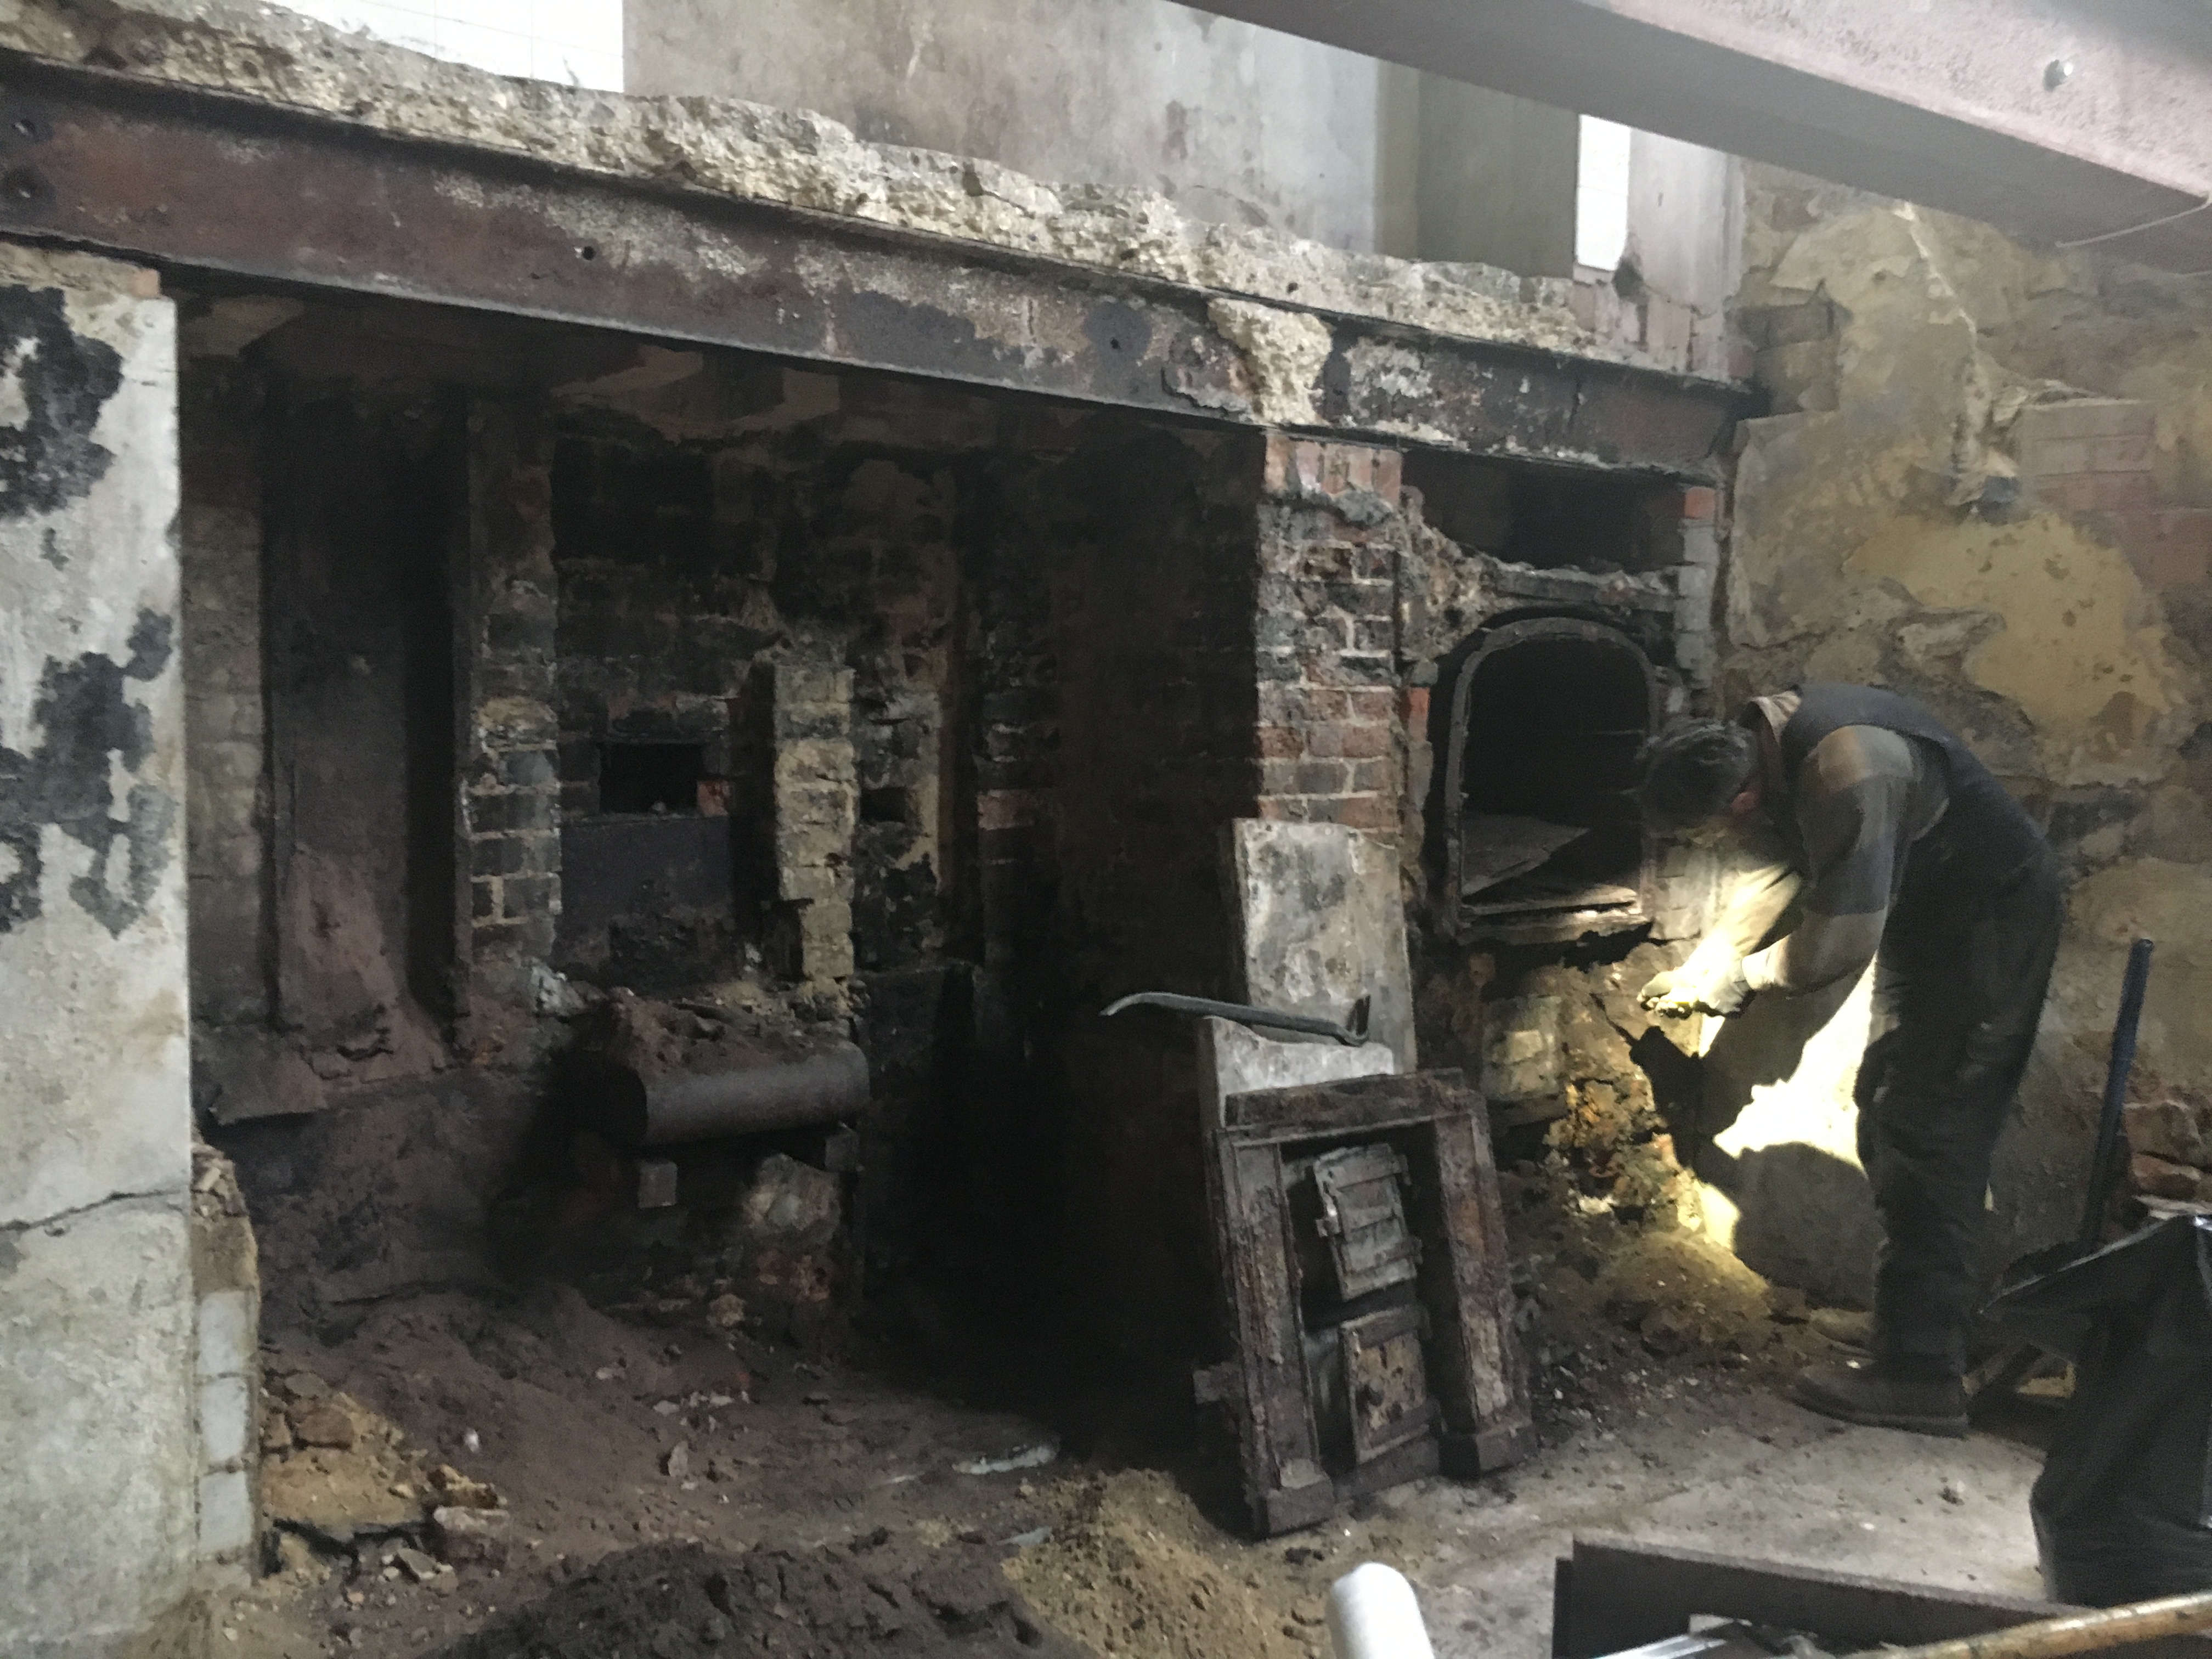 Old range stove blackened with age in state of disrepair.